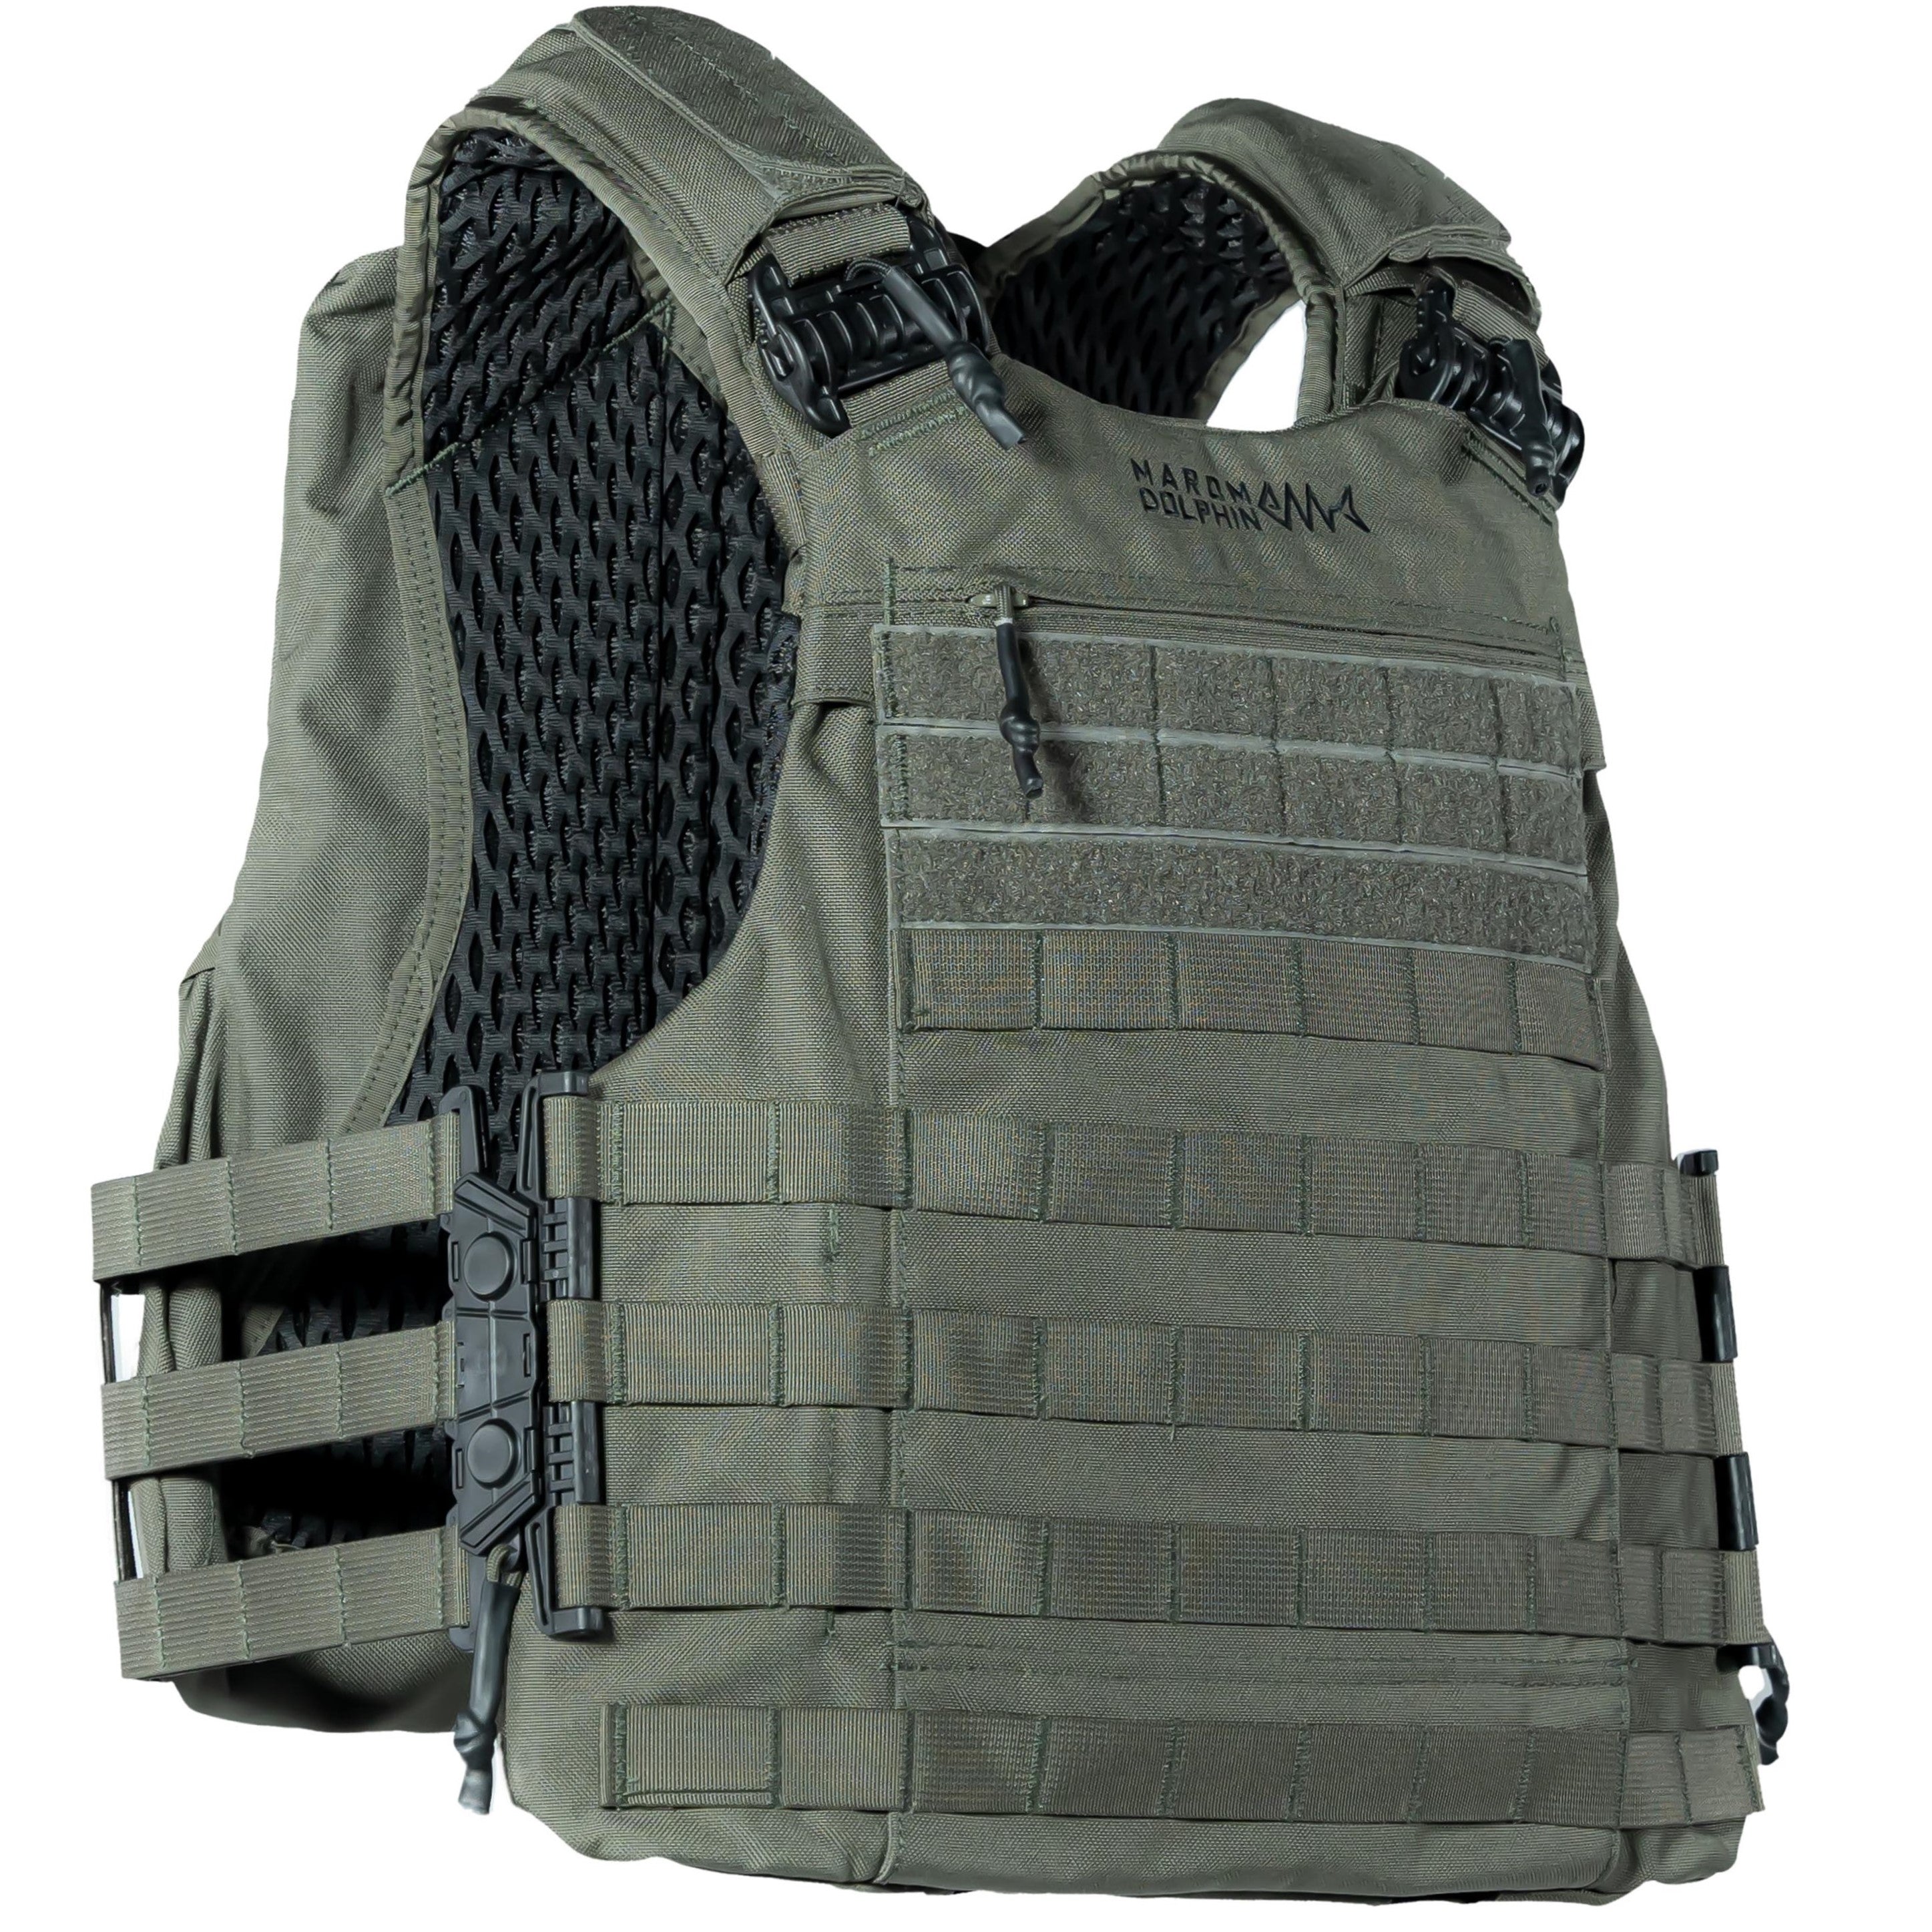 Commando vest - Pre-order for delivery in May 2024